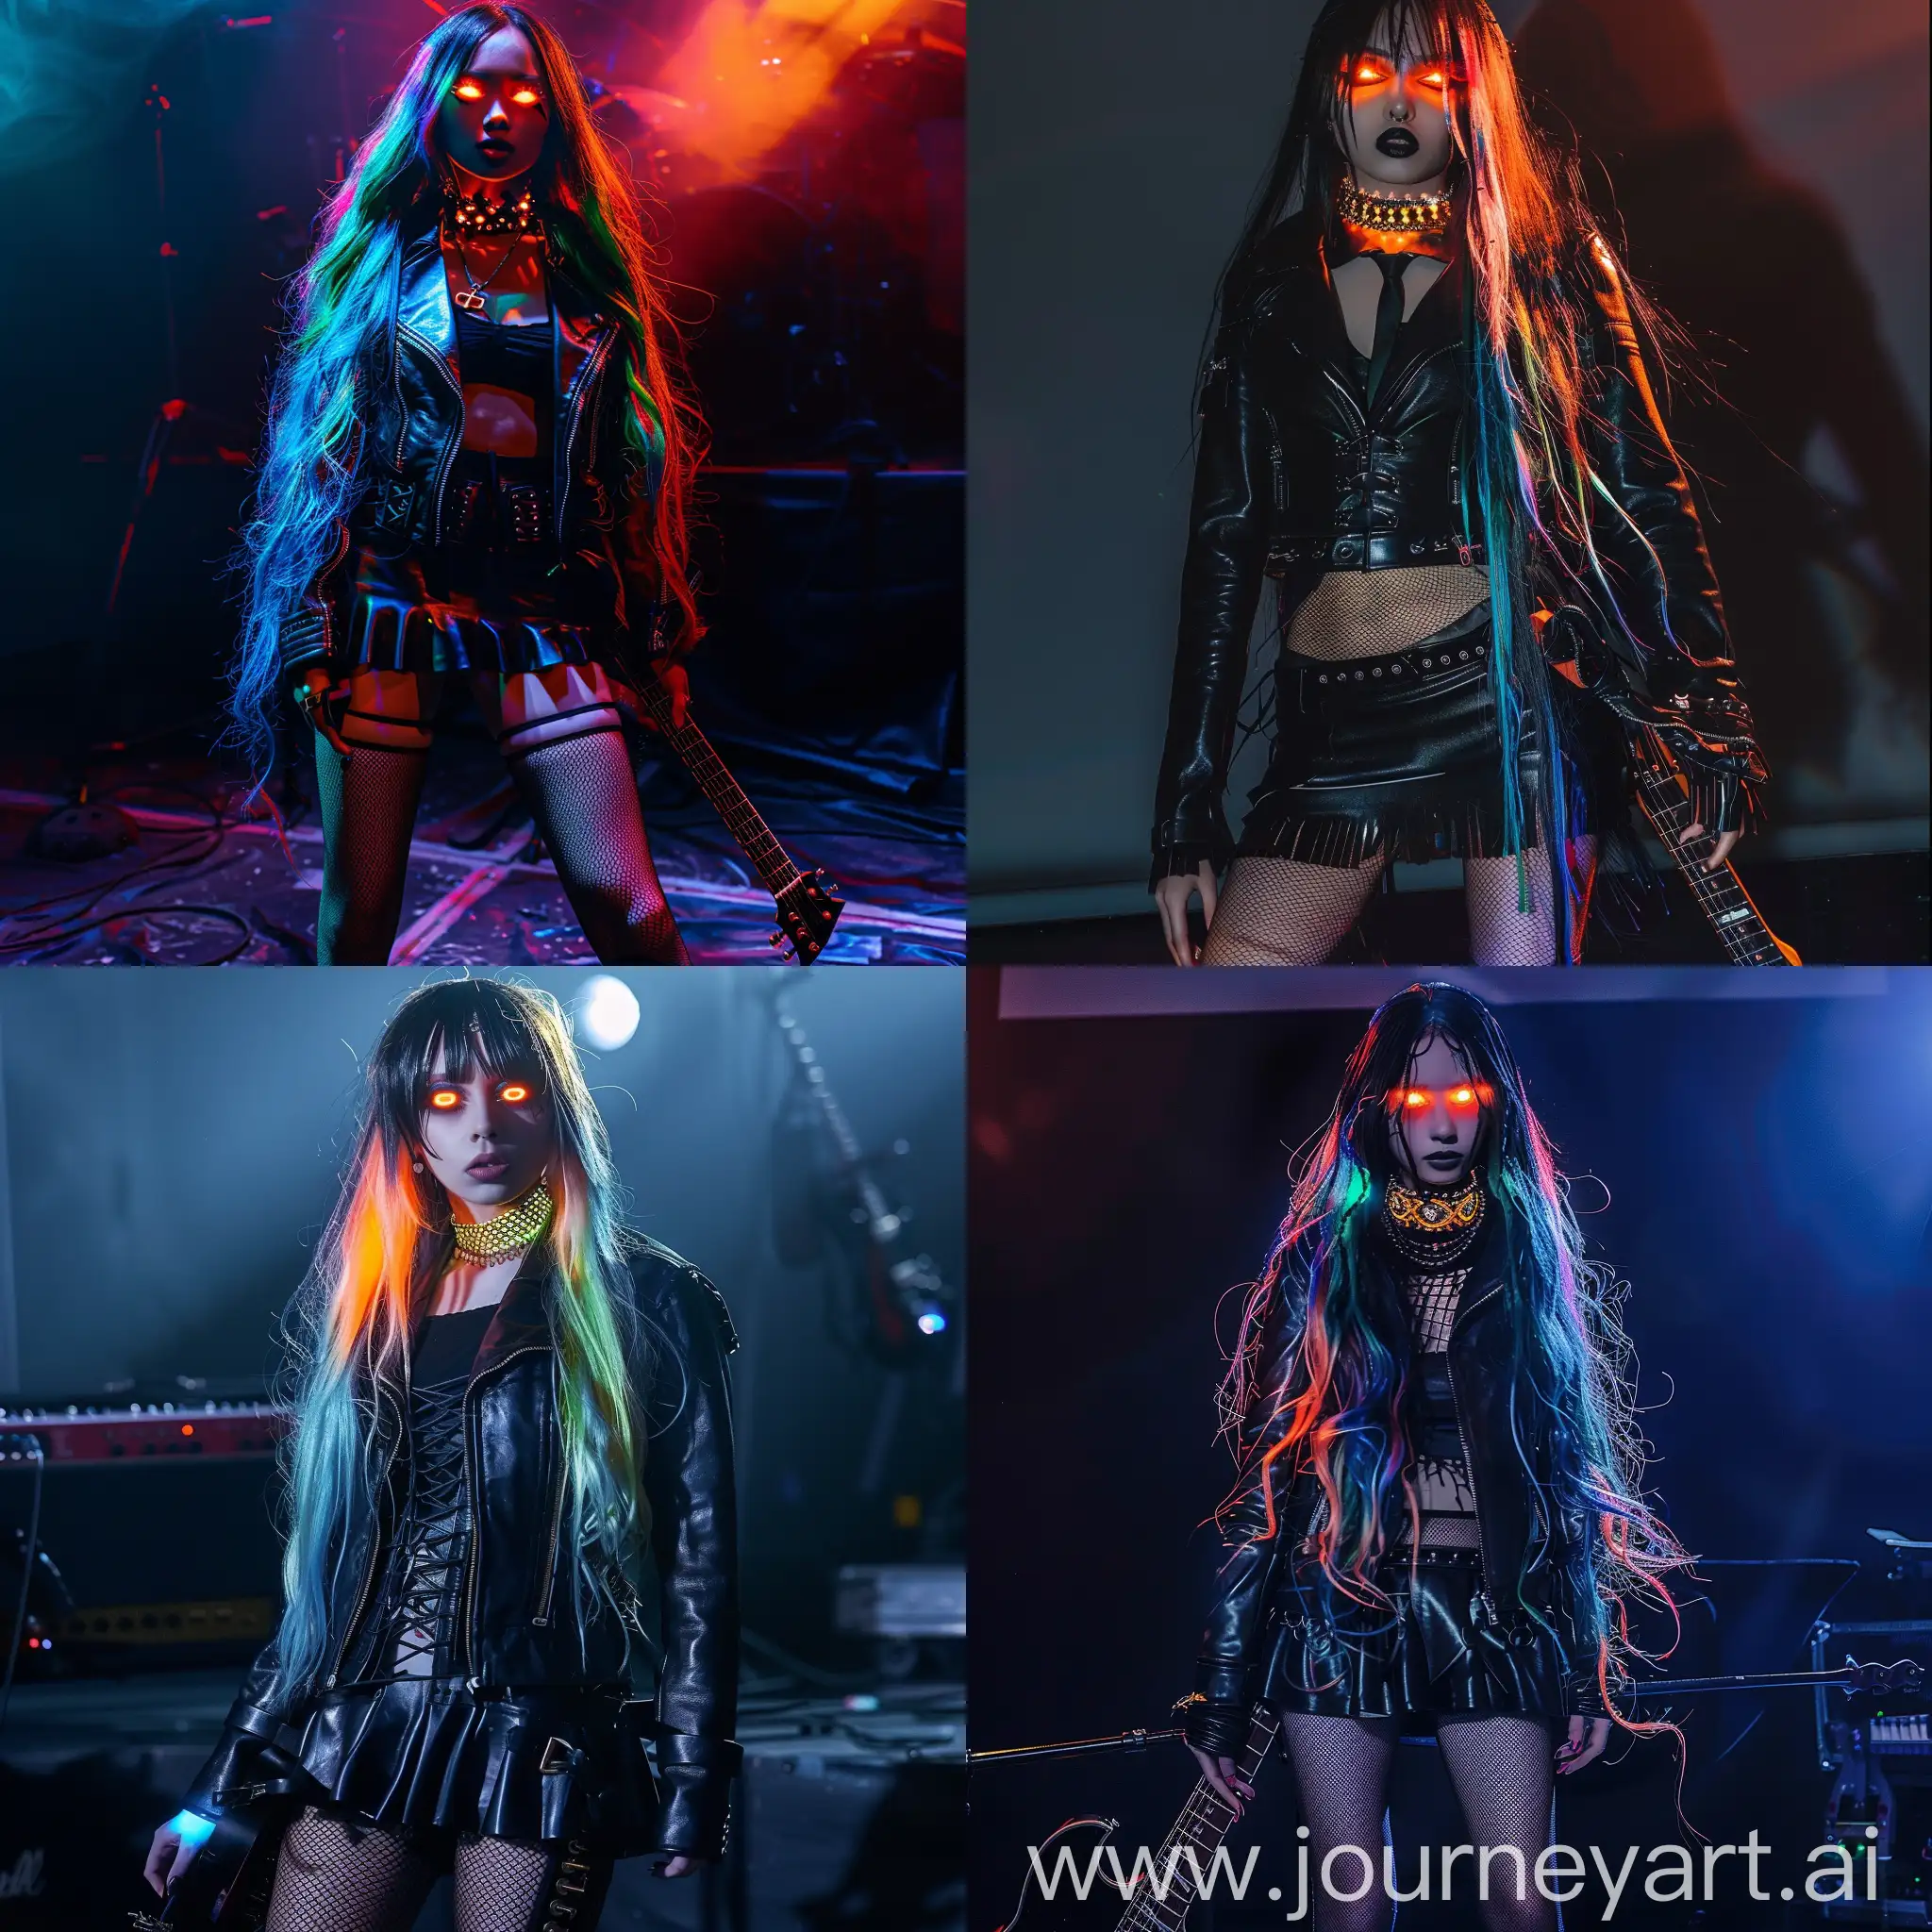 1girl, solo, multicolor long hair, glowing black hair, glowing orange eyes, alternative outfit, rock style leather jacket, short leather skirt, tights mesh ankle boots, electric guitar electro eye of god choker photo dark stage, studio light